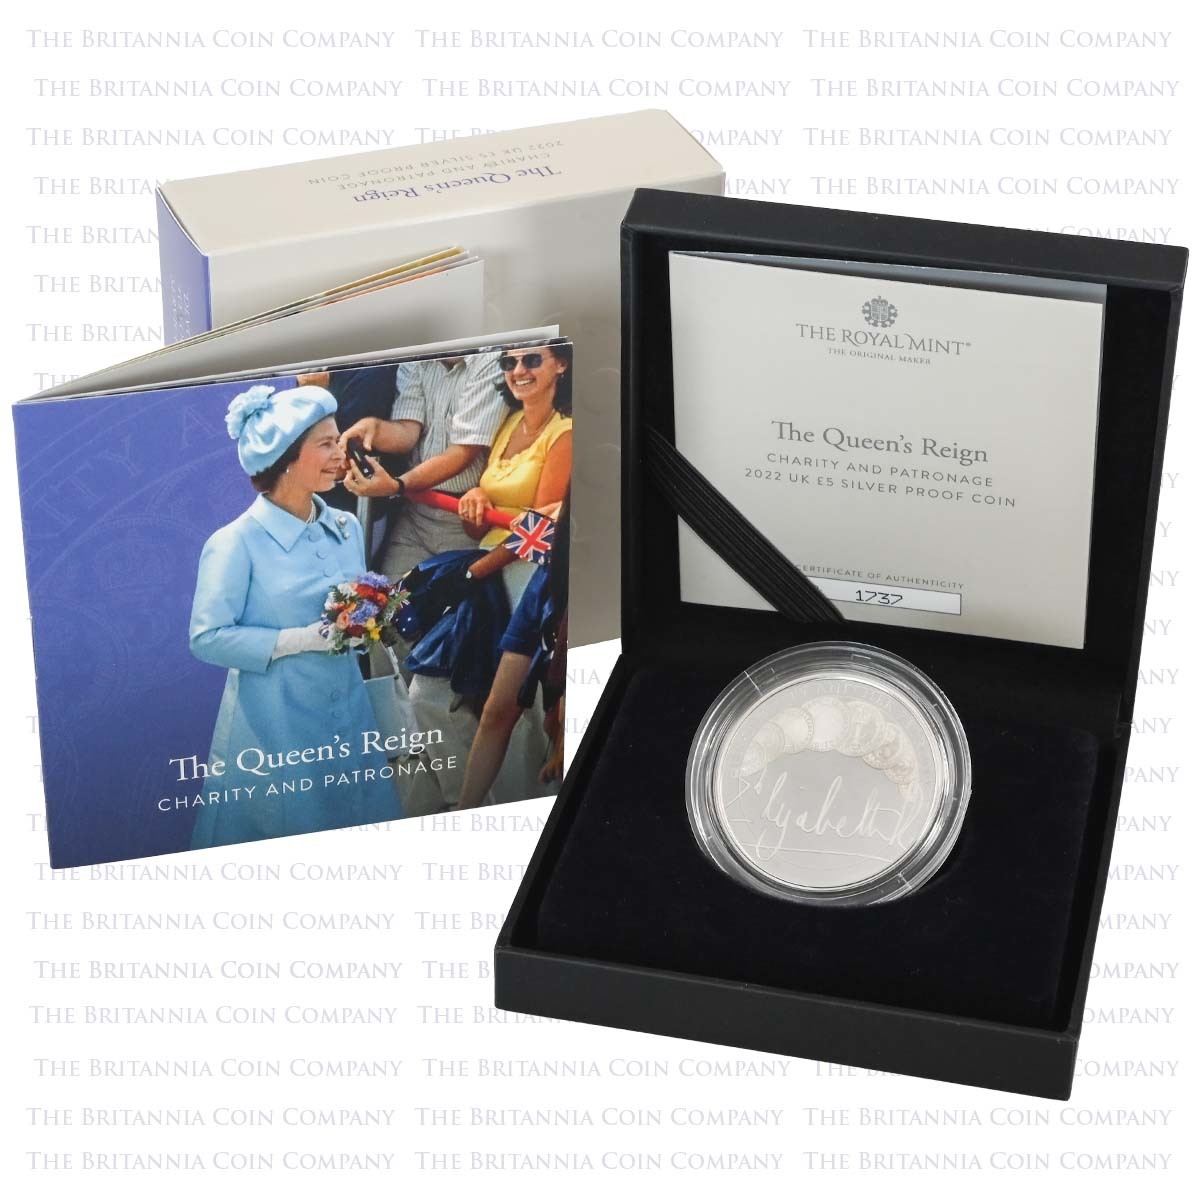 UK22QPSP 2022 Queen Elizabeth II Reign Charity And Patronage Five Pound Crown Silver Proof Coin Boxed